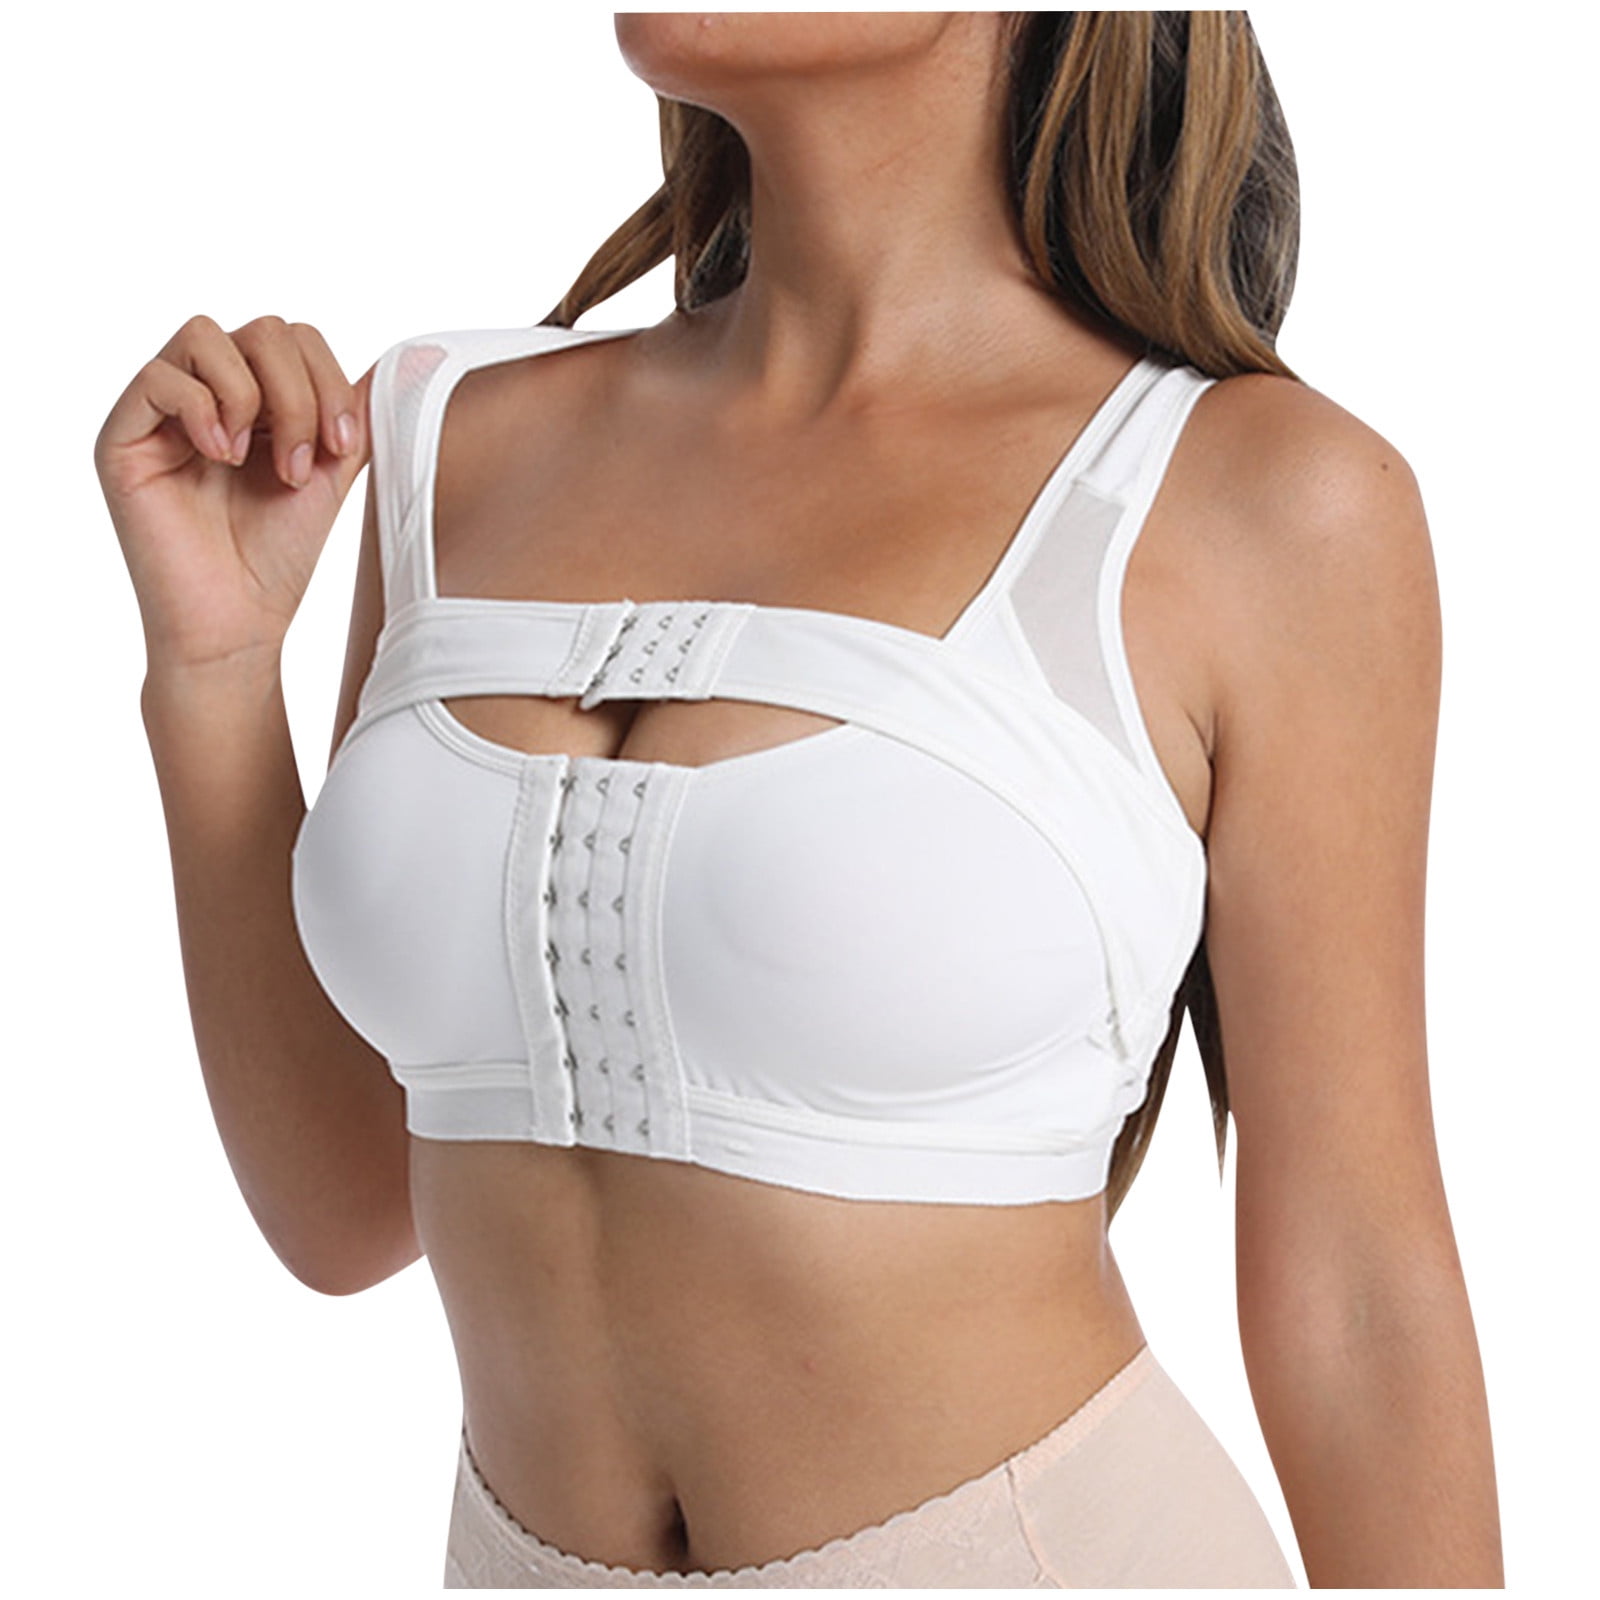 Mrat Clearance Sports Bras for Women High Support Sports Plus Size  Bralettes Plus Size Strapless Bras Criss Cross Back Bralette Wireless with  Support and Lift Bralettes Without Underwire Bras Beige M 